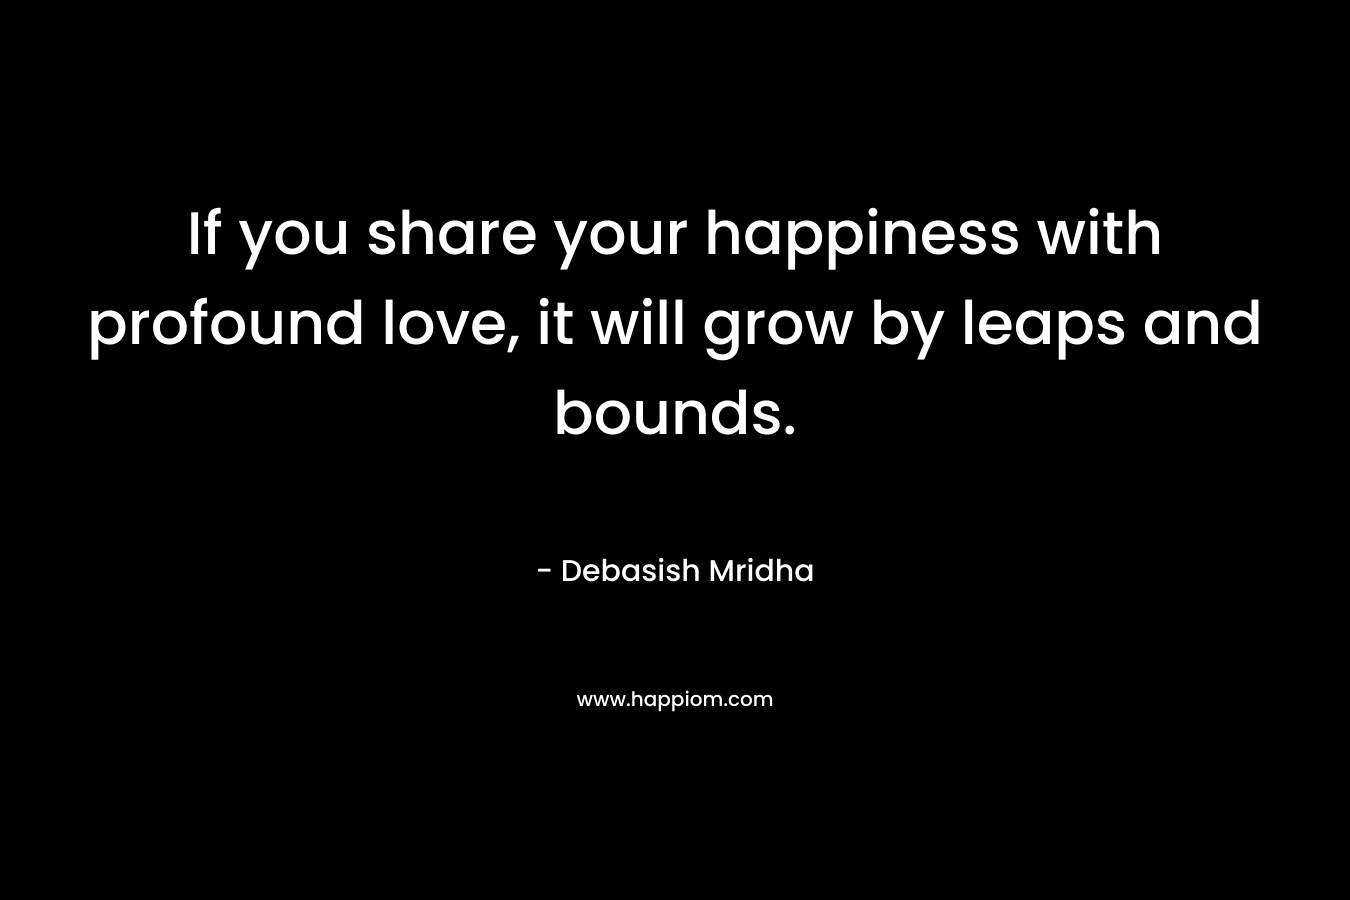 If you share your happiness with profound love, it will grow by leaps and bounds.